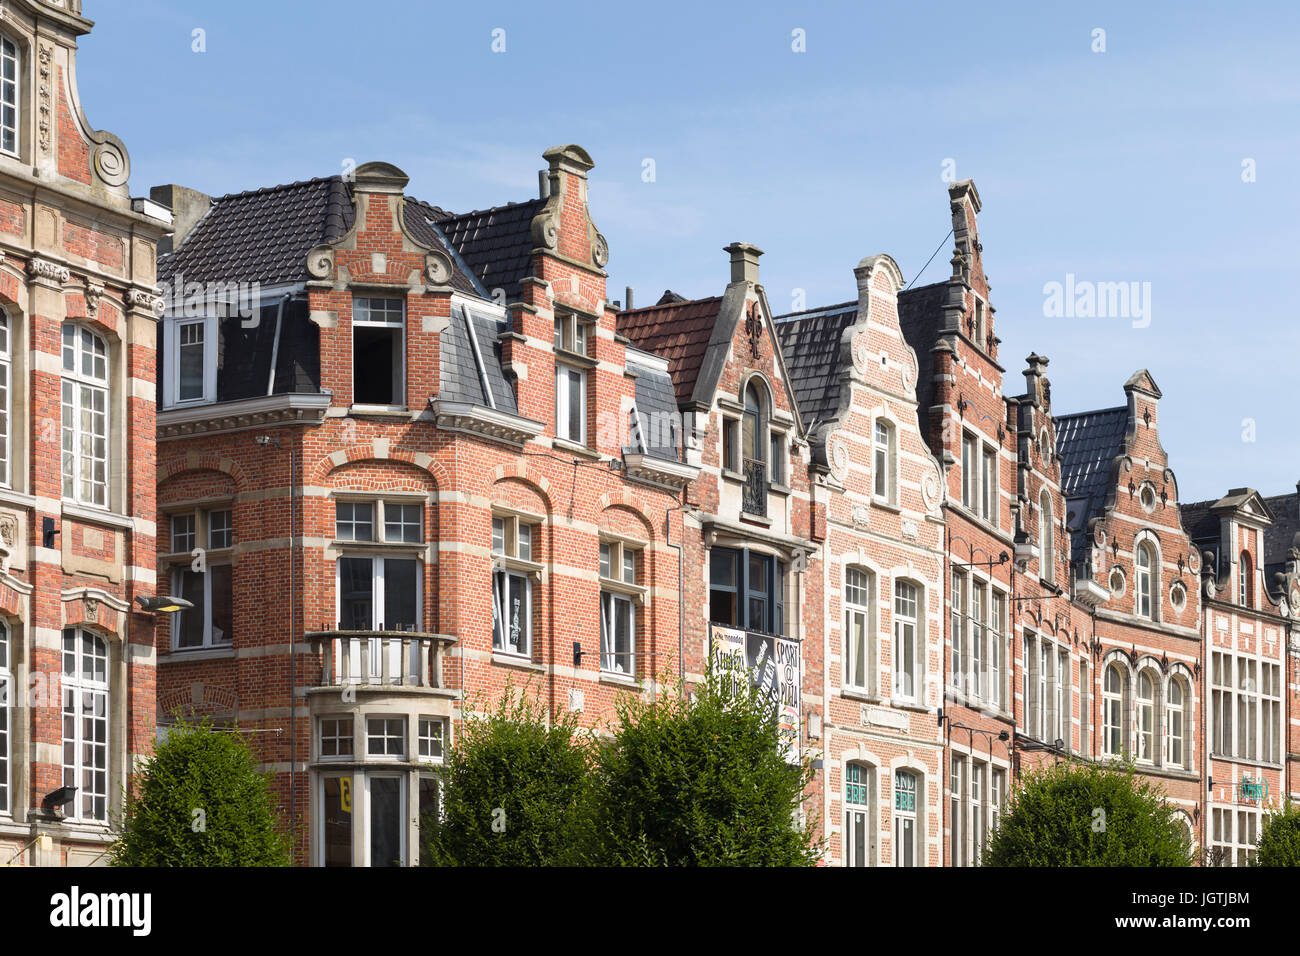 Typical old Flemish buildings with decorative gables in the centre of Leuven, Belgium, in the Oude Markt (Old Market) Stock Photo